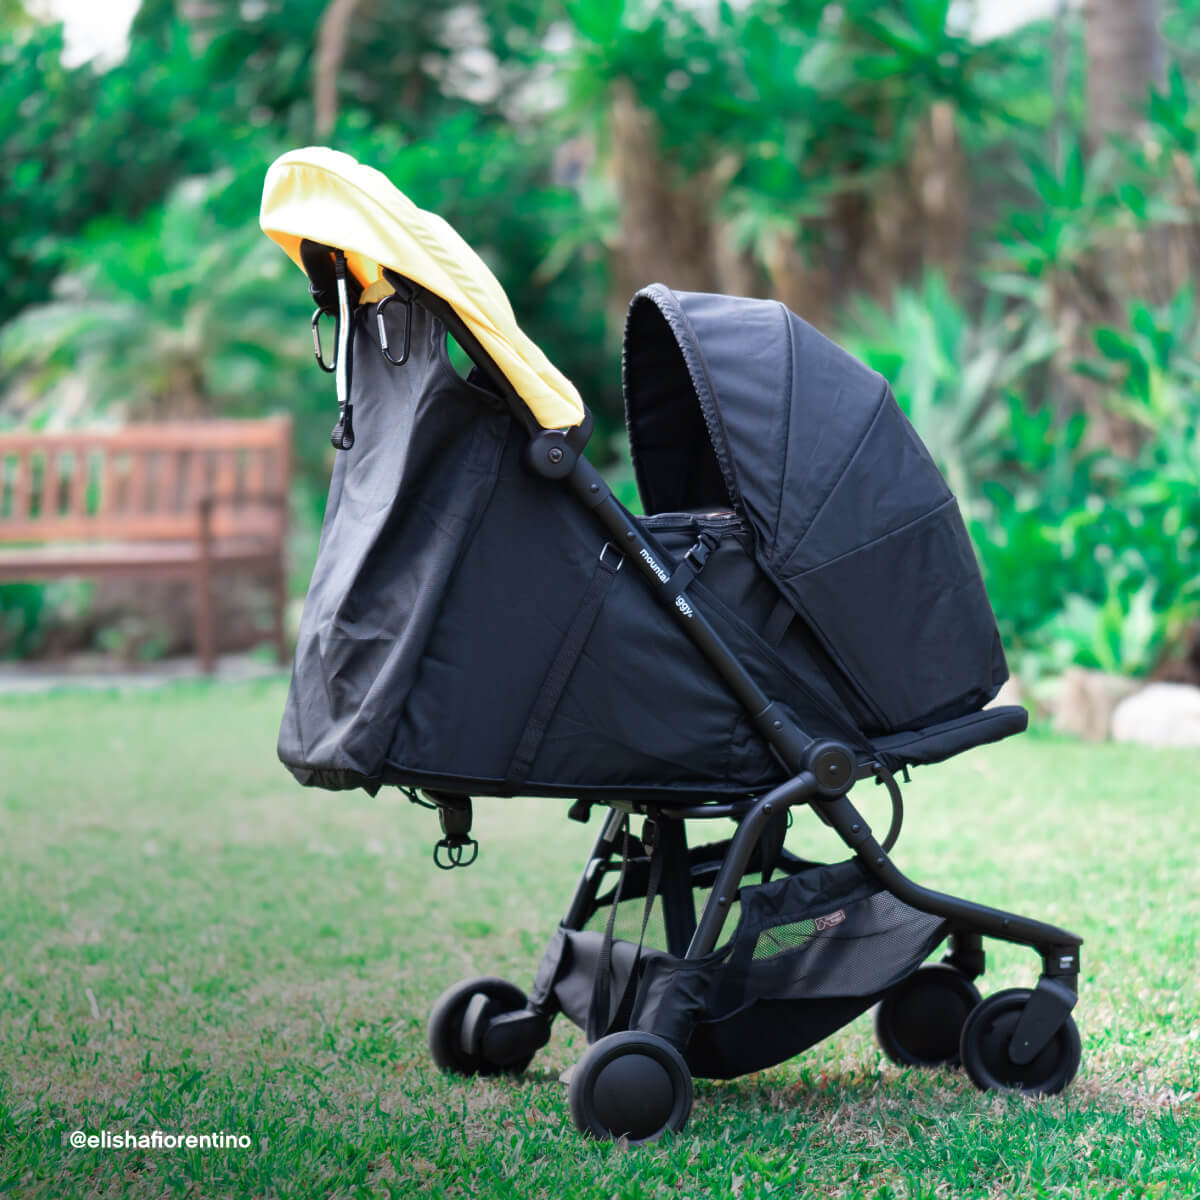 A Red Dot award winning designworld class in safety, stability and materialssuperior manoeuvrability and kerb popincredibly affordableluxury seat right from newborn